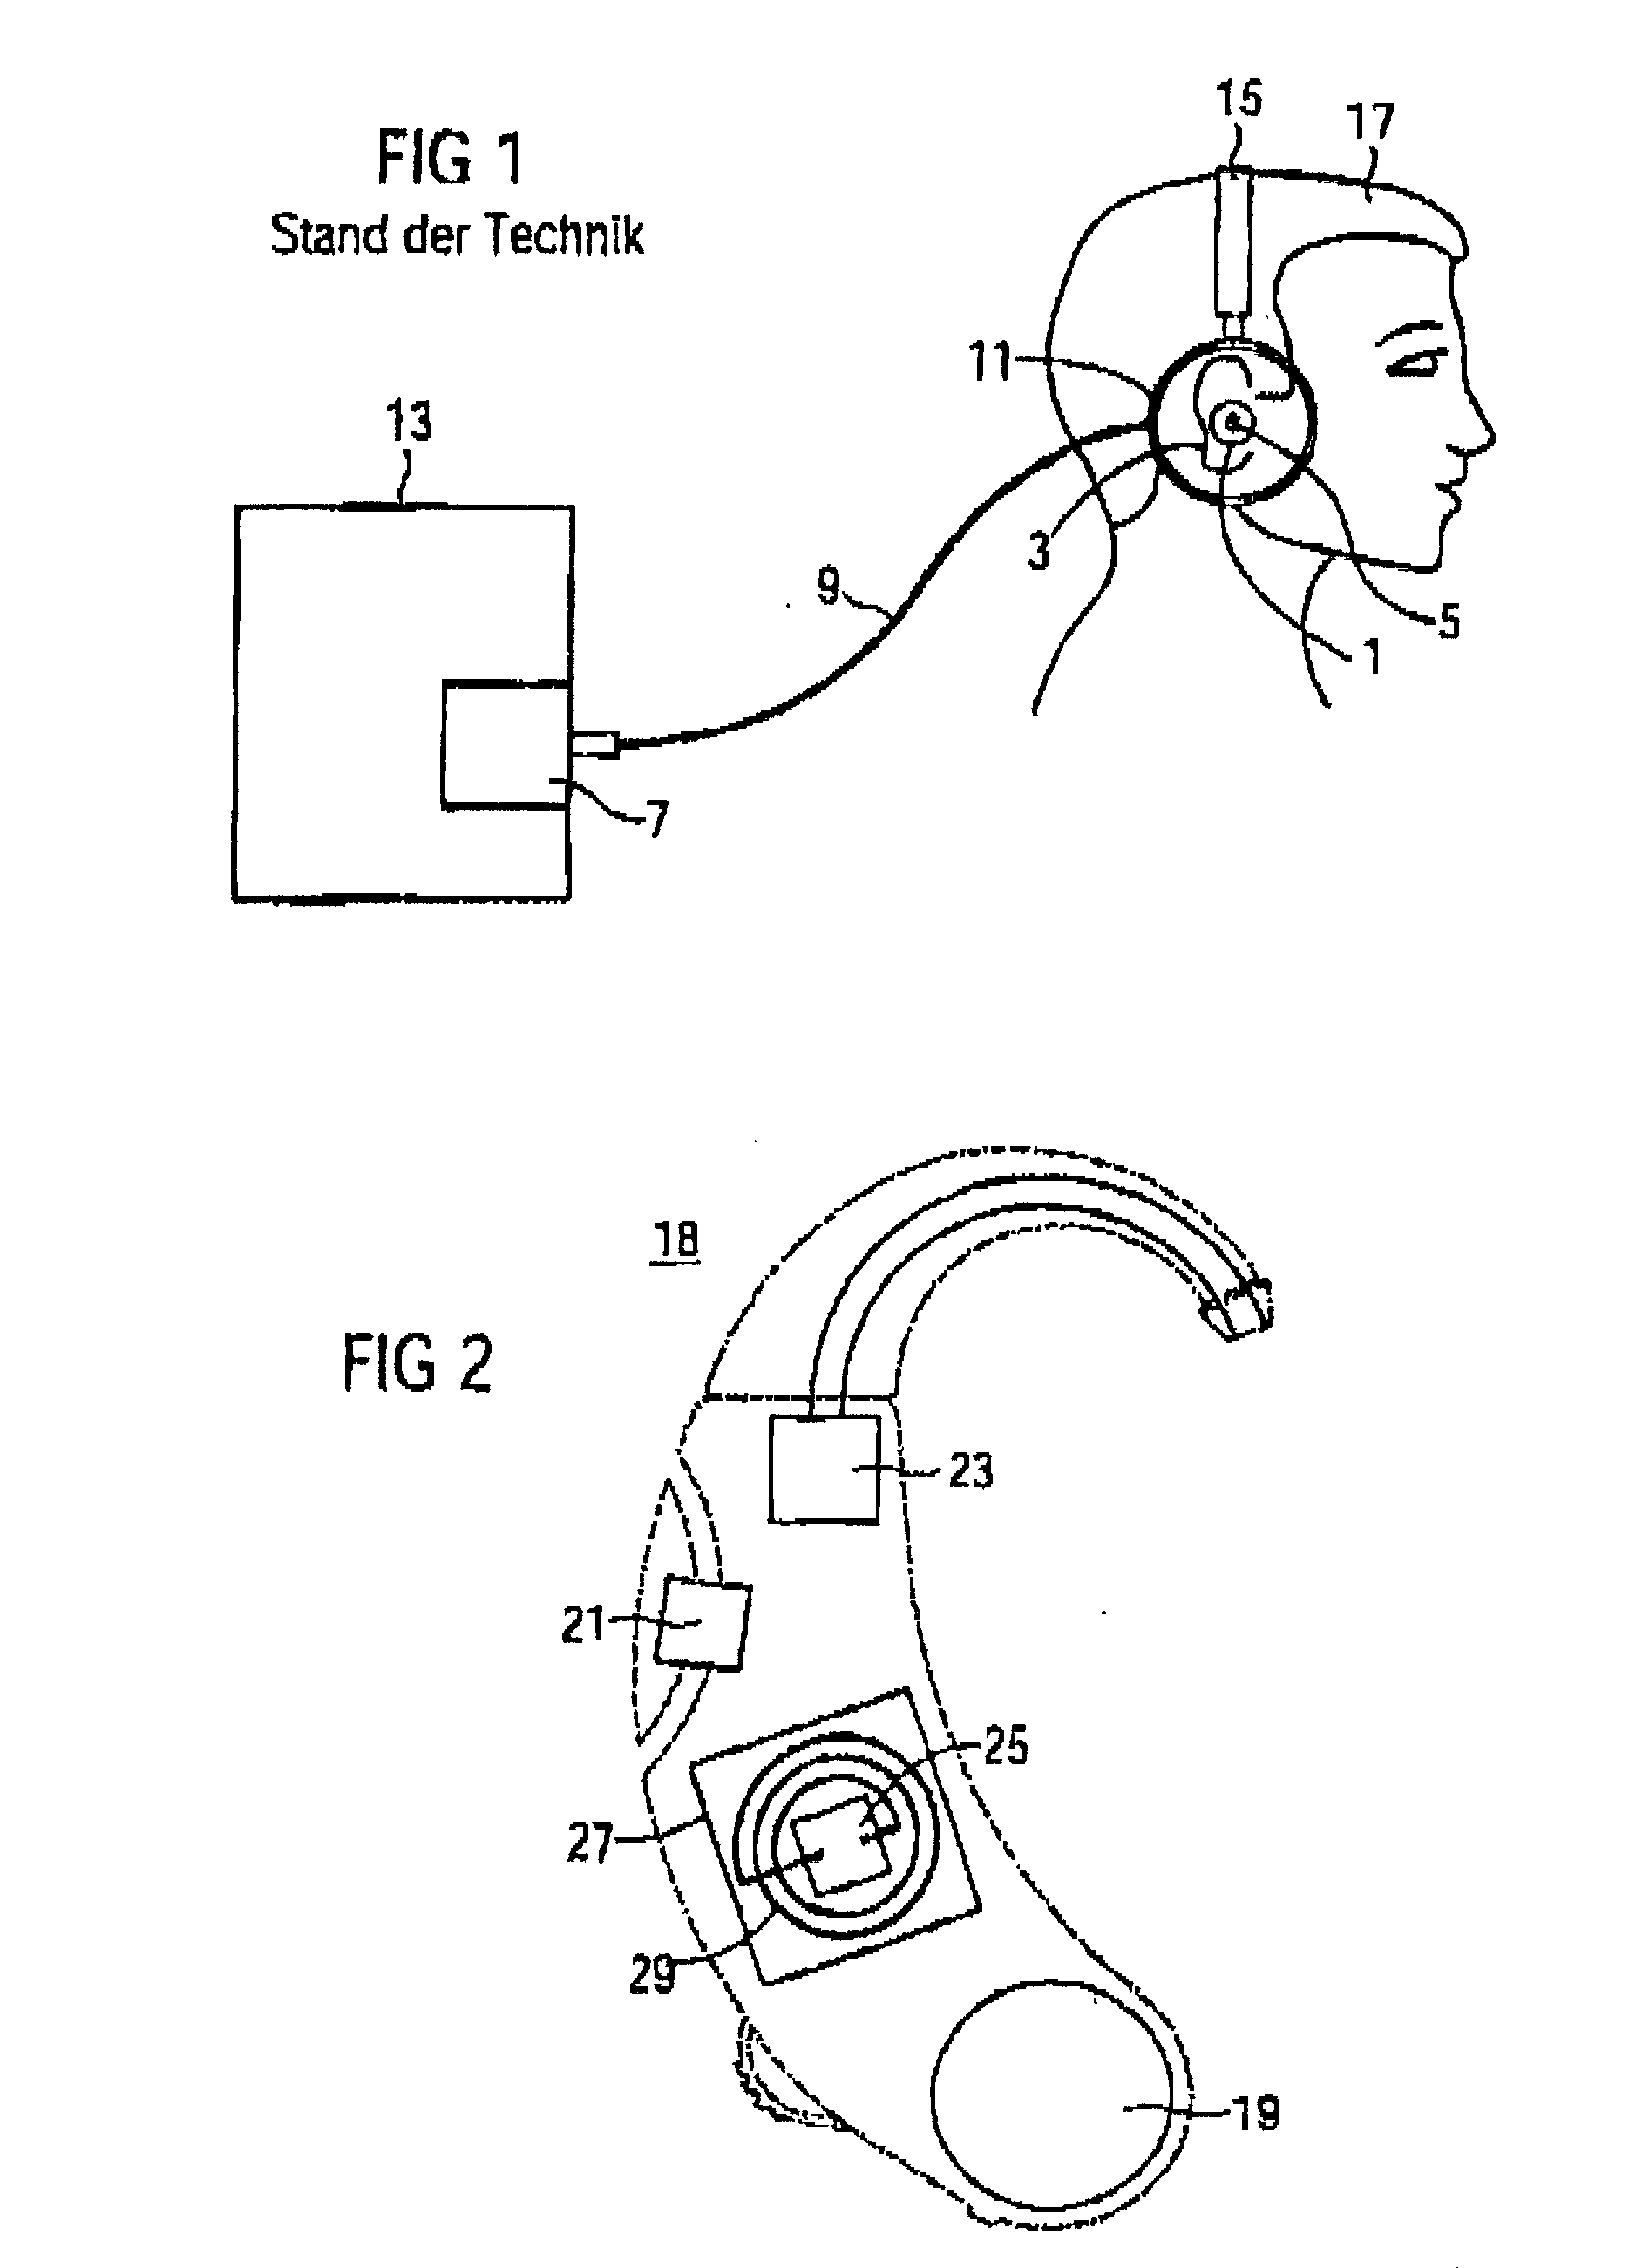 Wirelessly programmable hearing aid device